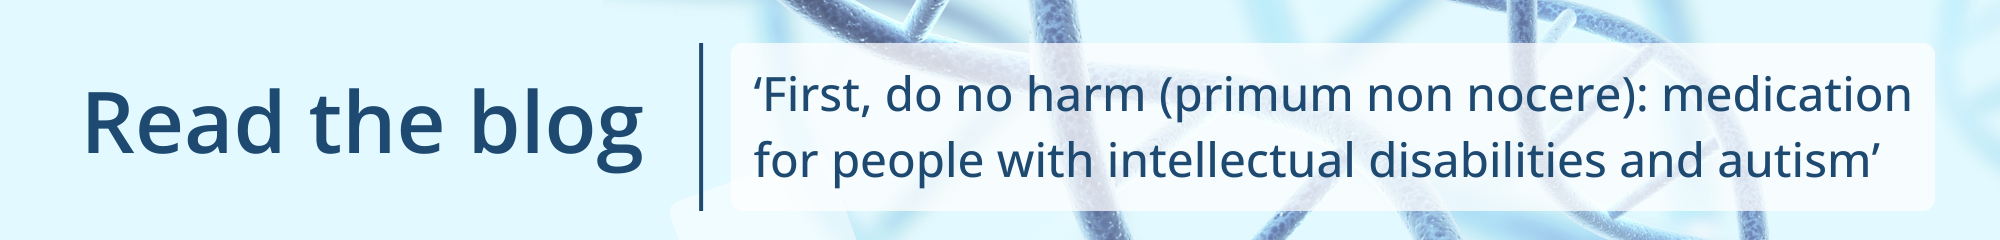 Click to read the blog: "First, do no harm (primum non nocere): medication for people with intellectual disabilities and autism"